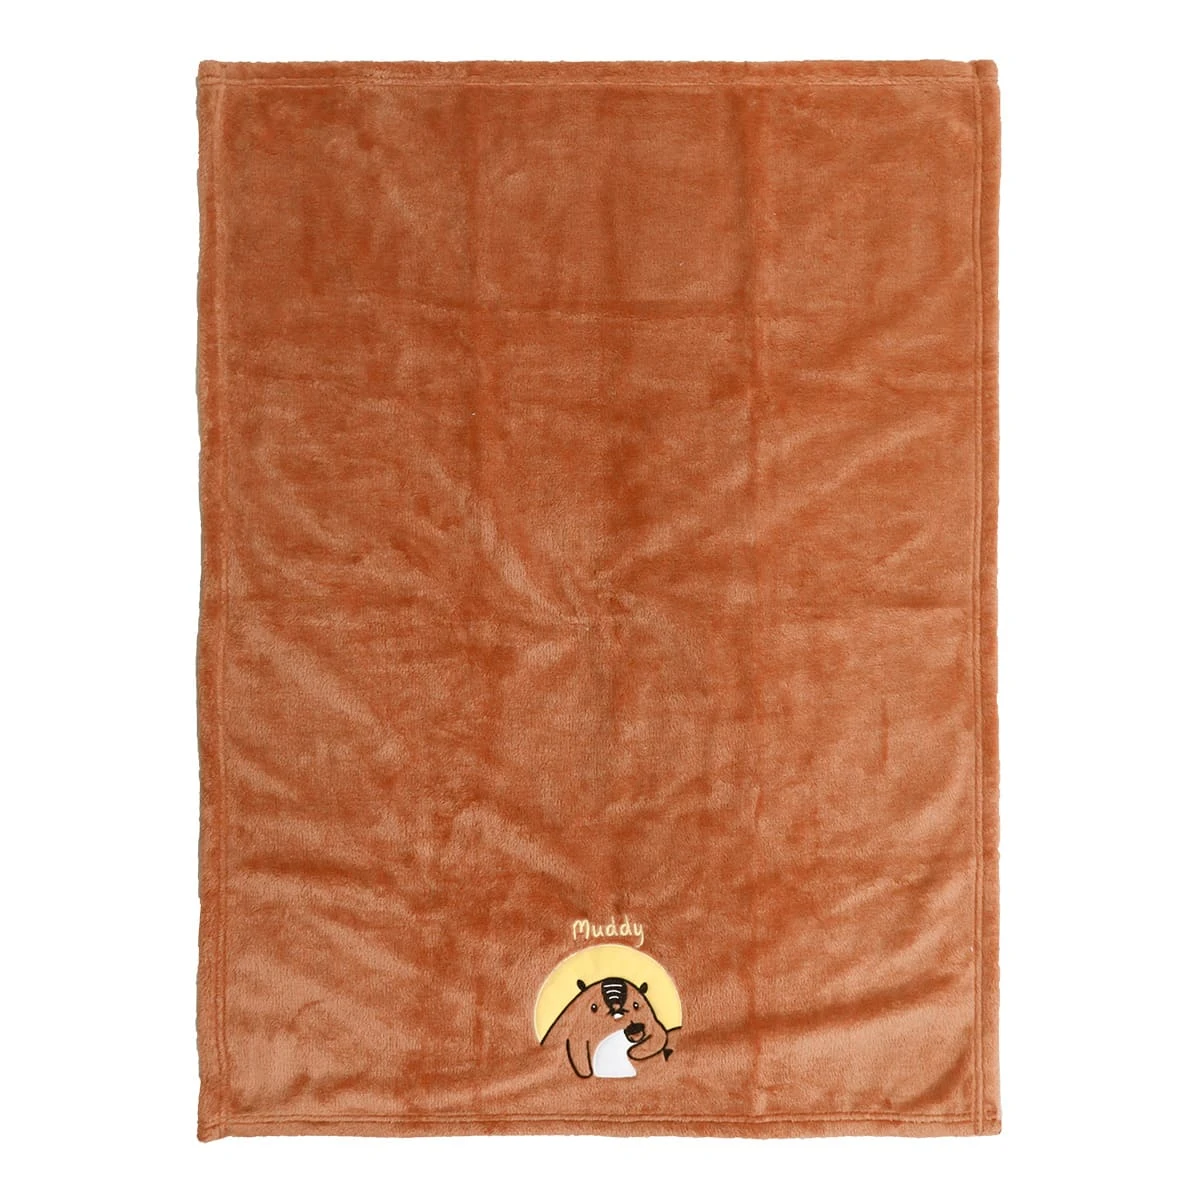 Muddy Embroidery Plush Baby Blanket (Brown)